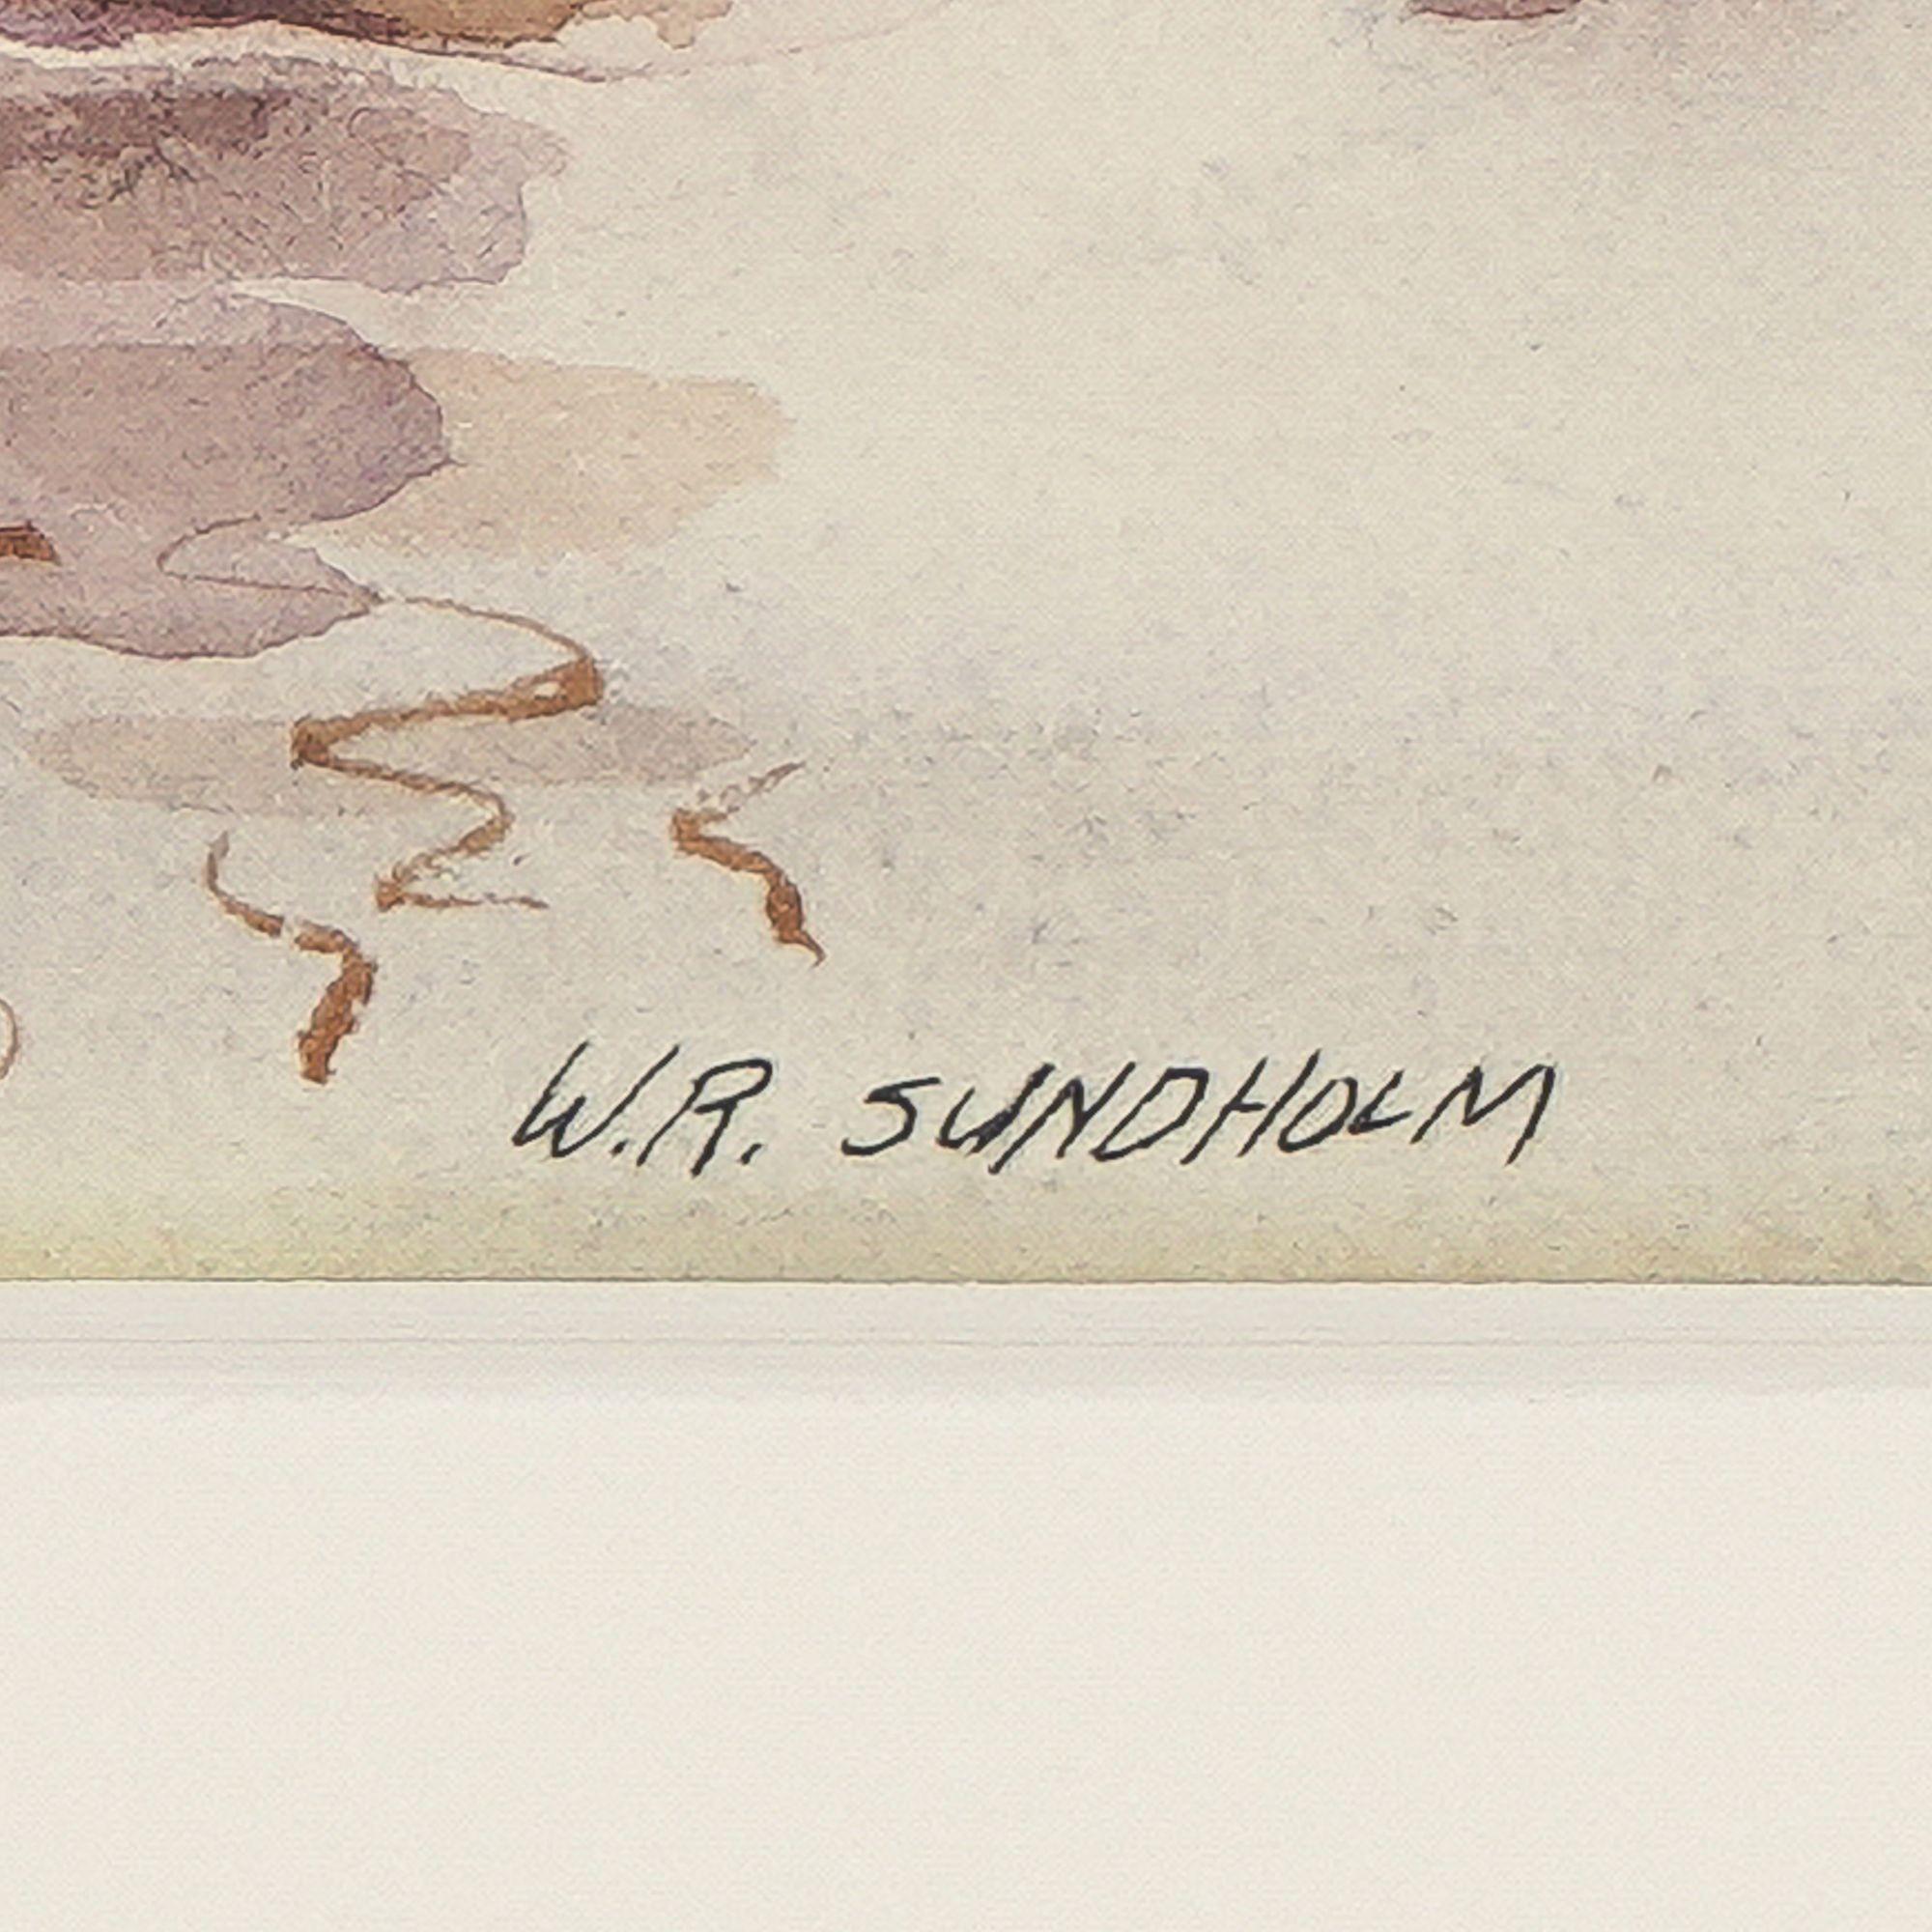 Paper Watercolor of duck hunters on a punt by W.R. Sundholm For Sale